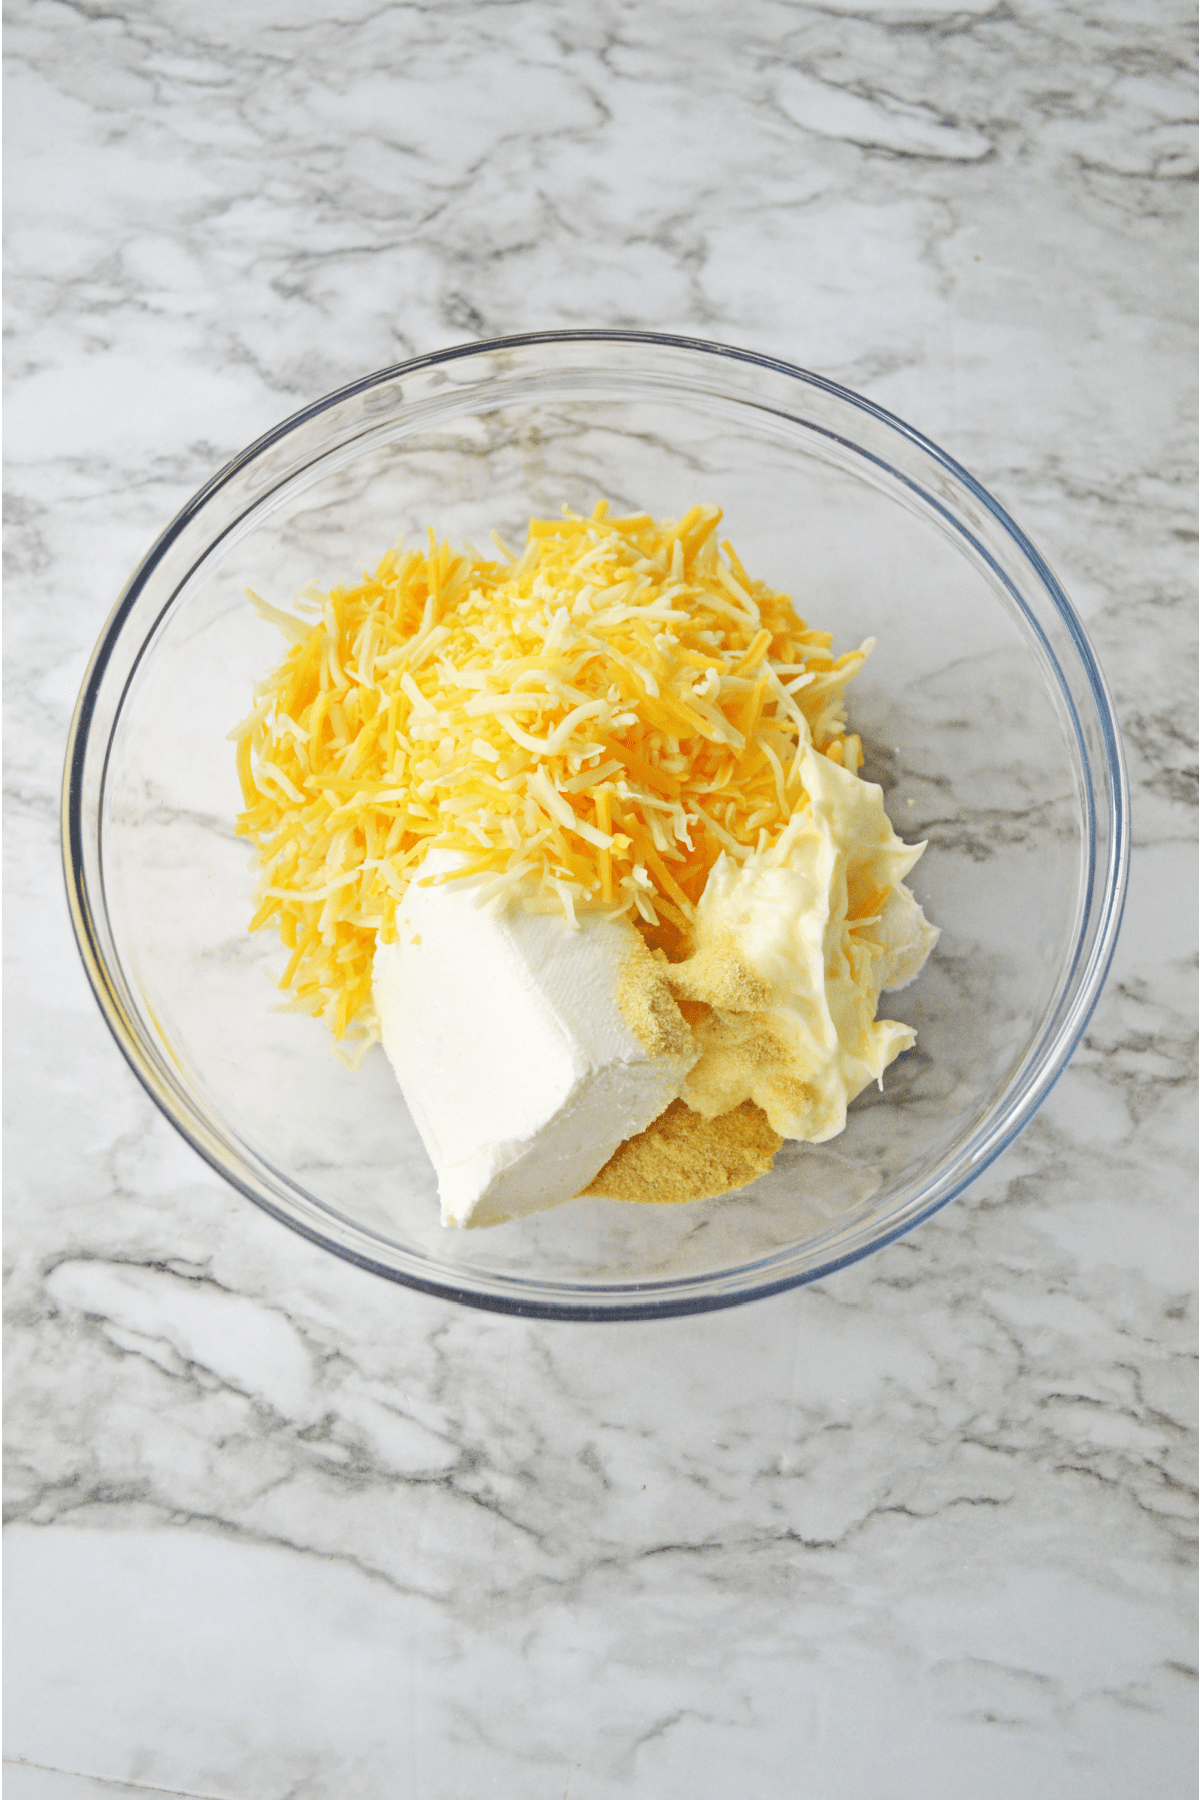 Cheddar, cream cheese and mayo in glass bowl